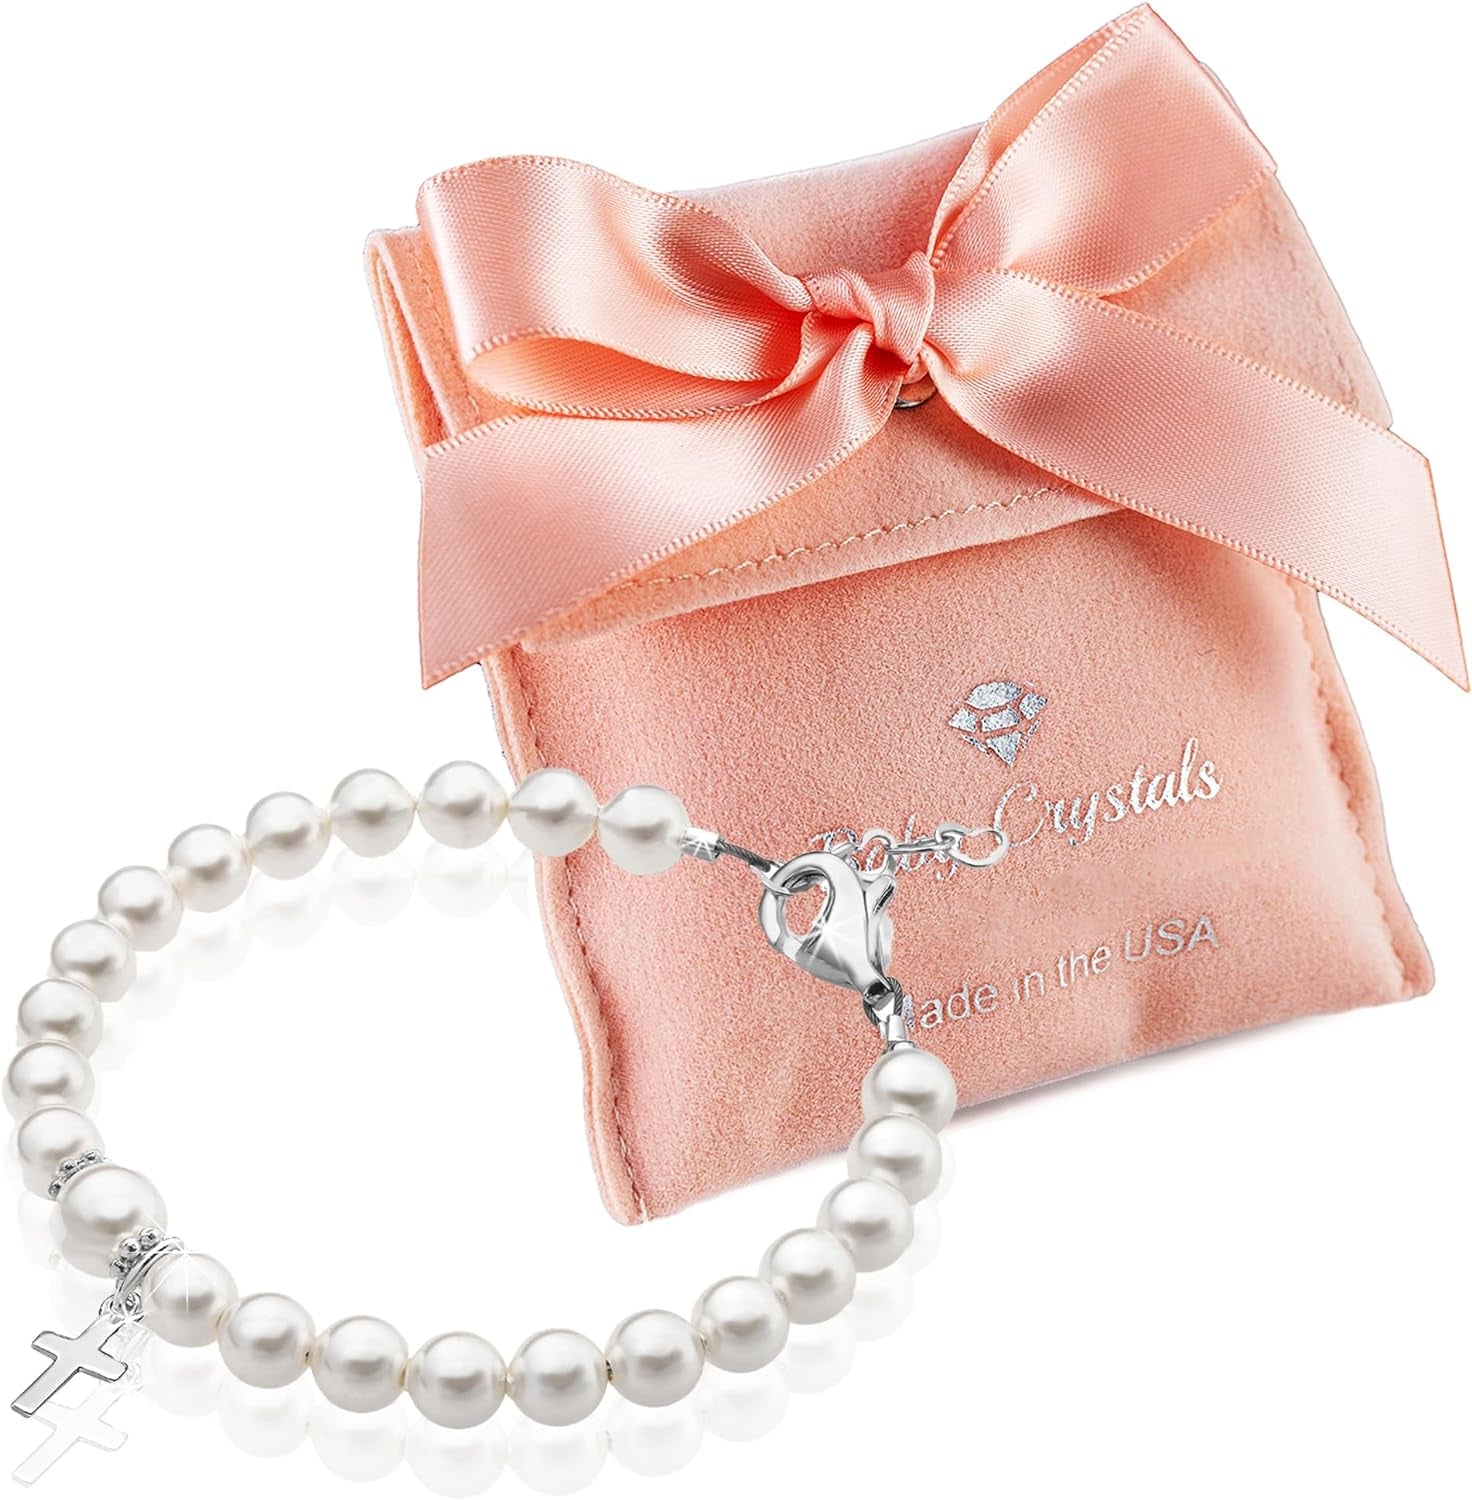 Baptism Pearl Bracelet for Girls, Sterling Silver Cross Charm Baptism Gifts for Girl with White European Simulated Pearls, Elegant Girls Jewelry